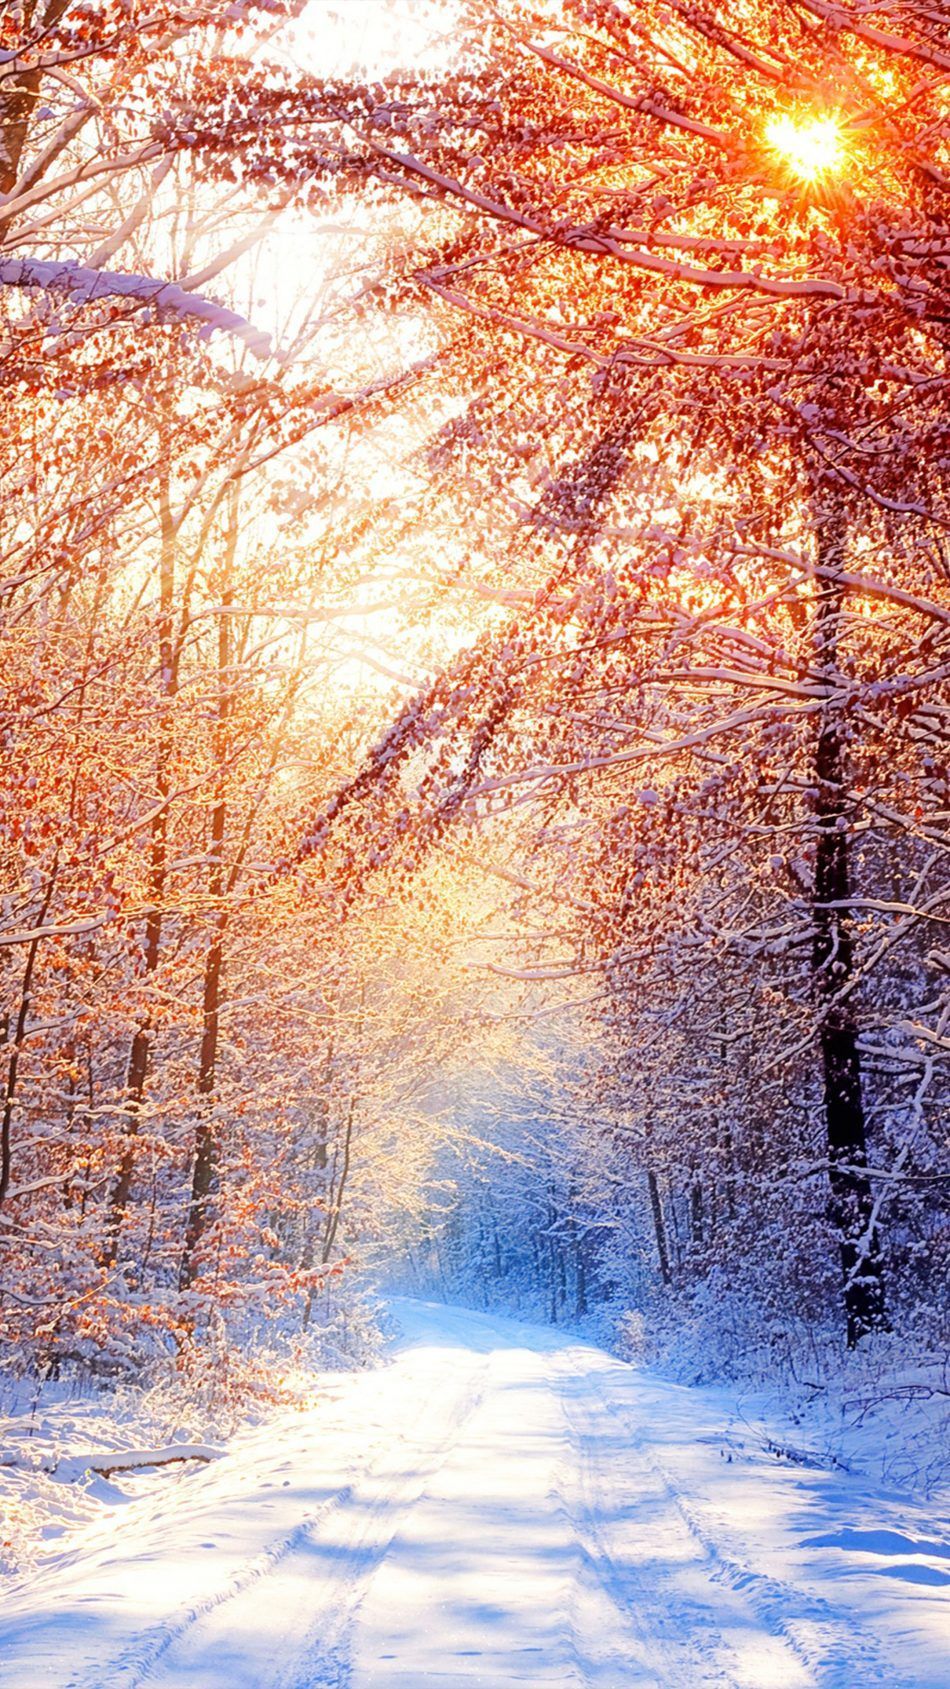 Snow Trees Winter Morning 4K Ultra HD Mobile Wallpaper. iPhone wallpaper winter, Winter wallpaper, Winter iphone